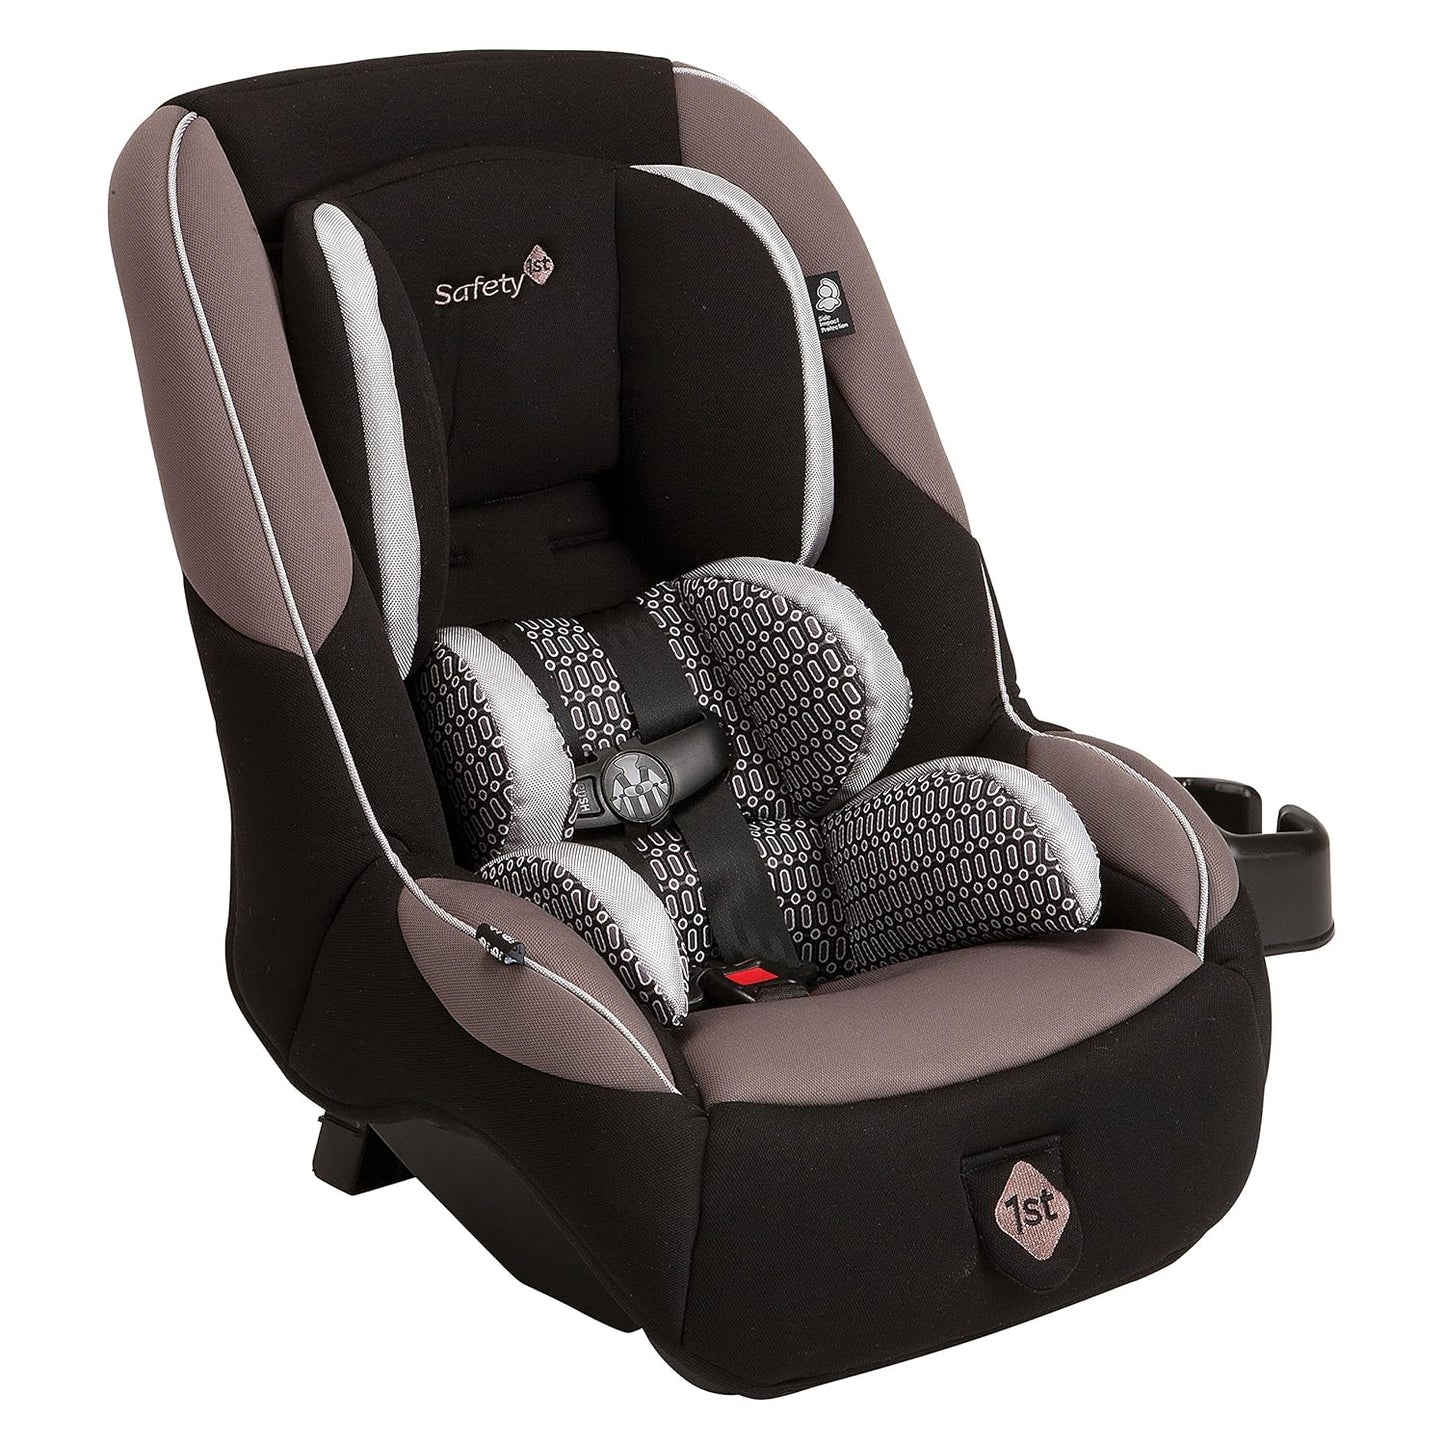 Safety 1st Guide 65 Convertible Car Seat, Chambers, Black